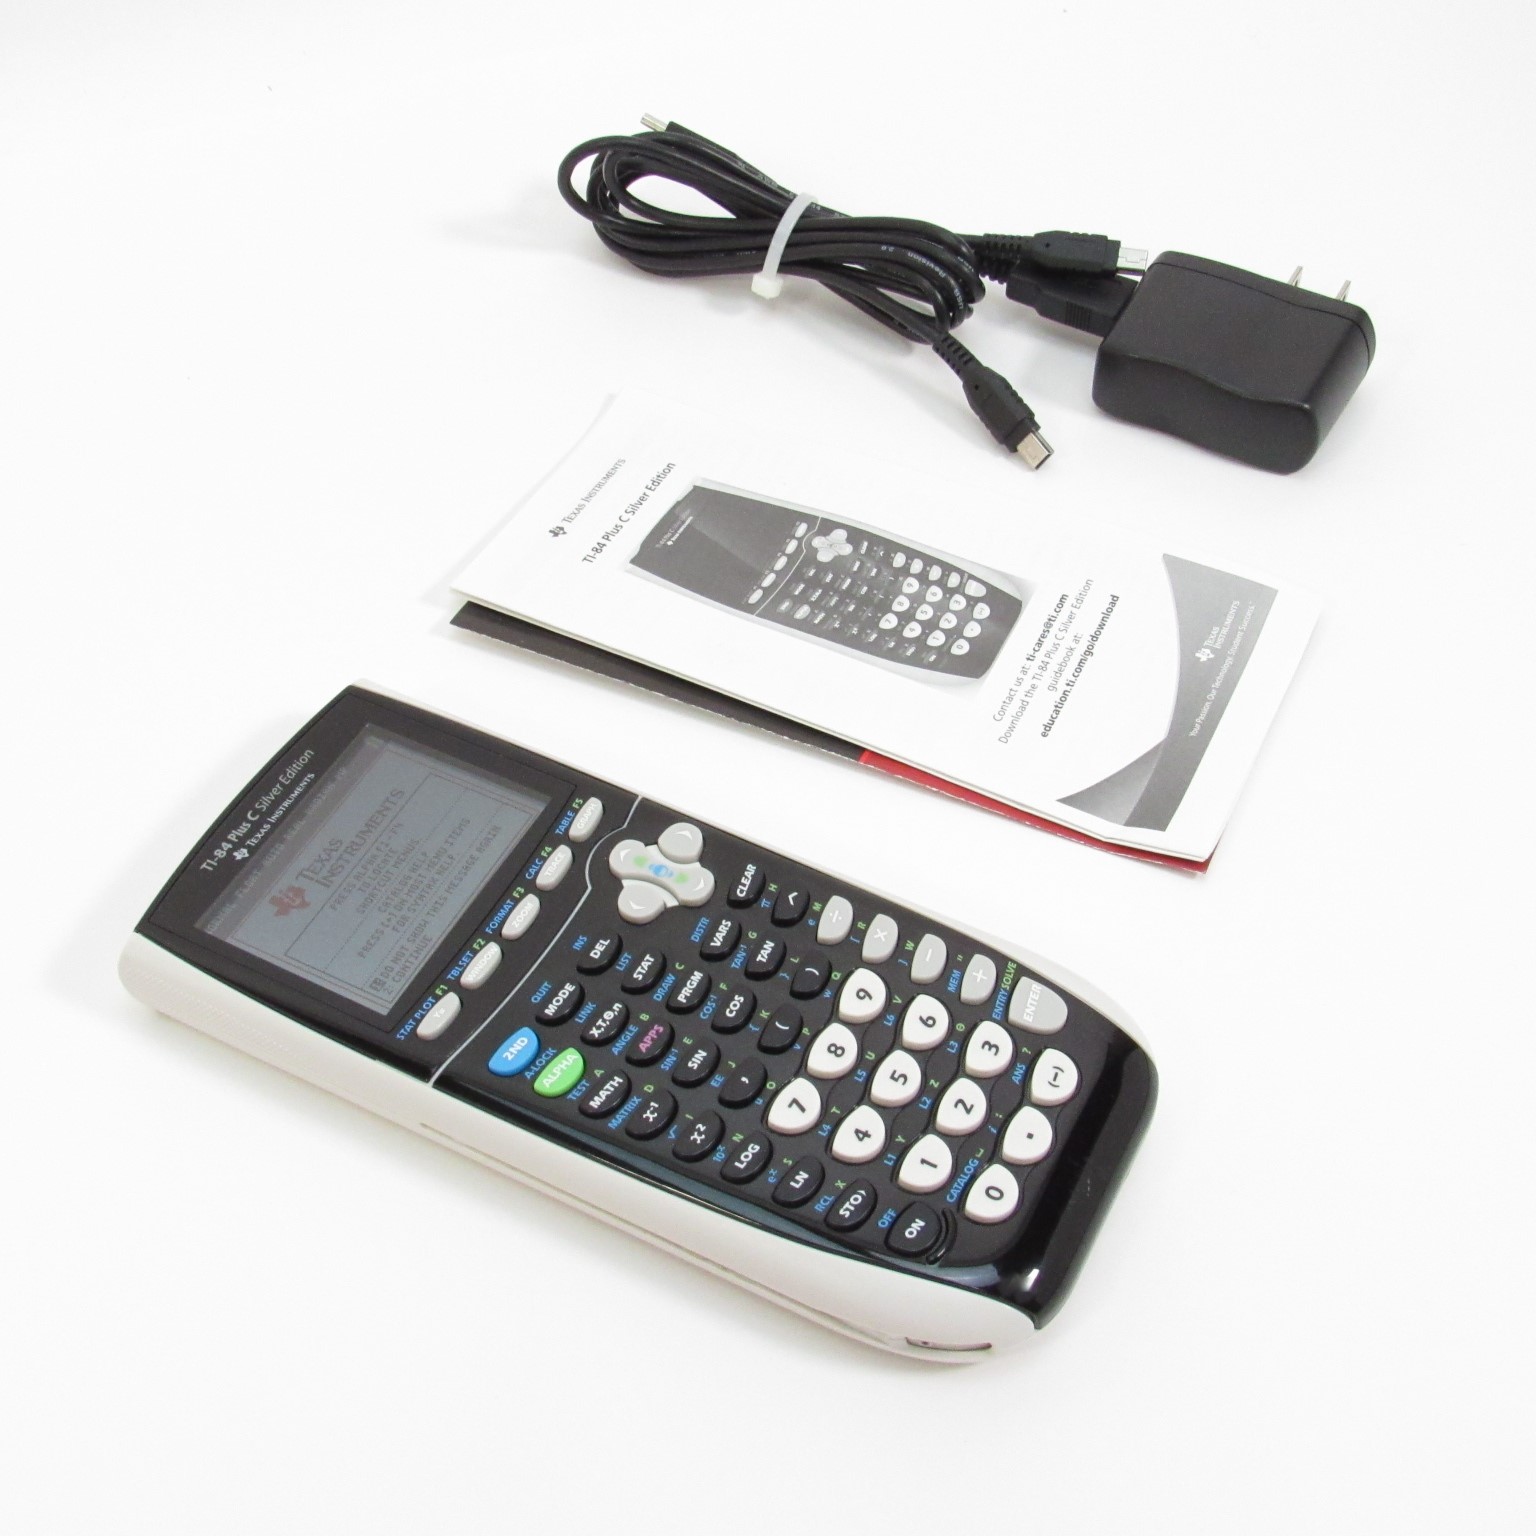 Texas Instruments TI-84 Plus C Silver Edition Graphing Calculator